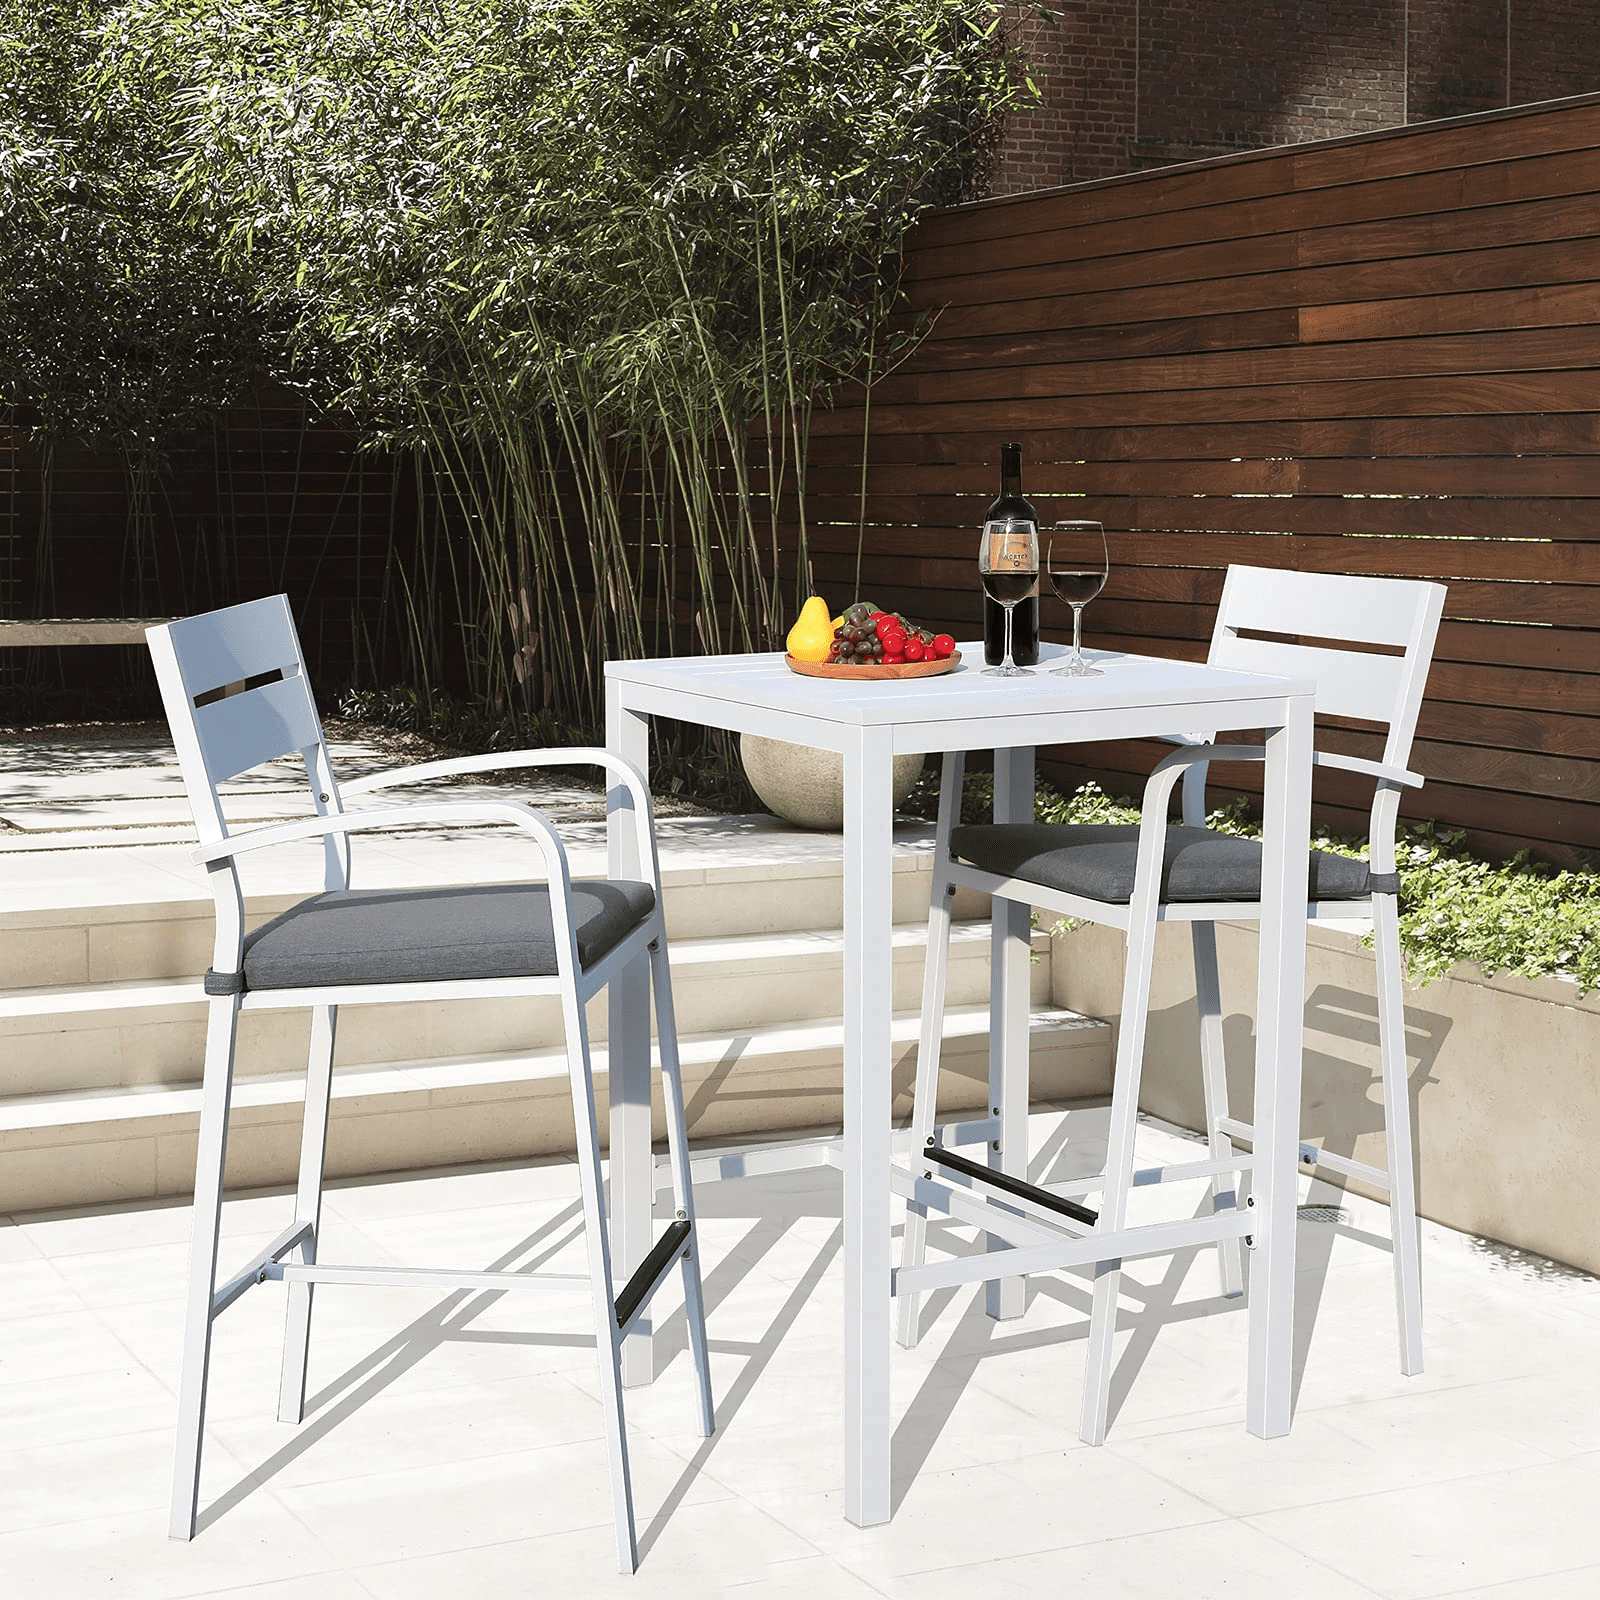 Patio Bar Height Table And Chairs Set, Outdoor Bar Chairs And Table